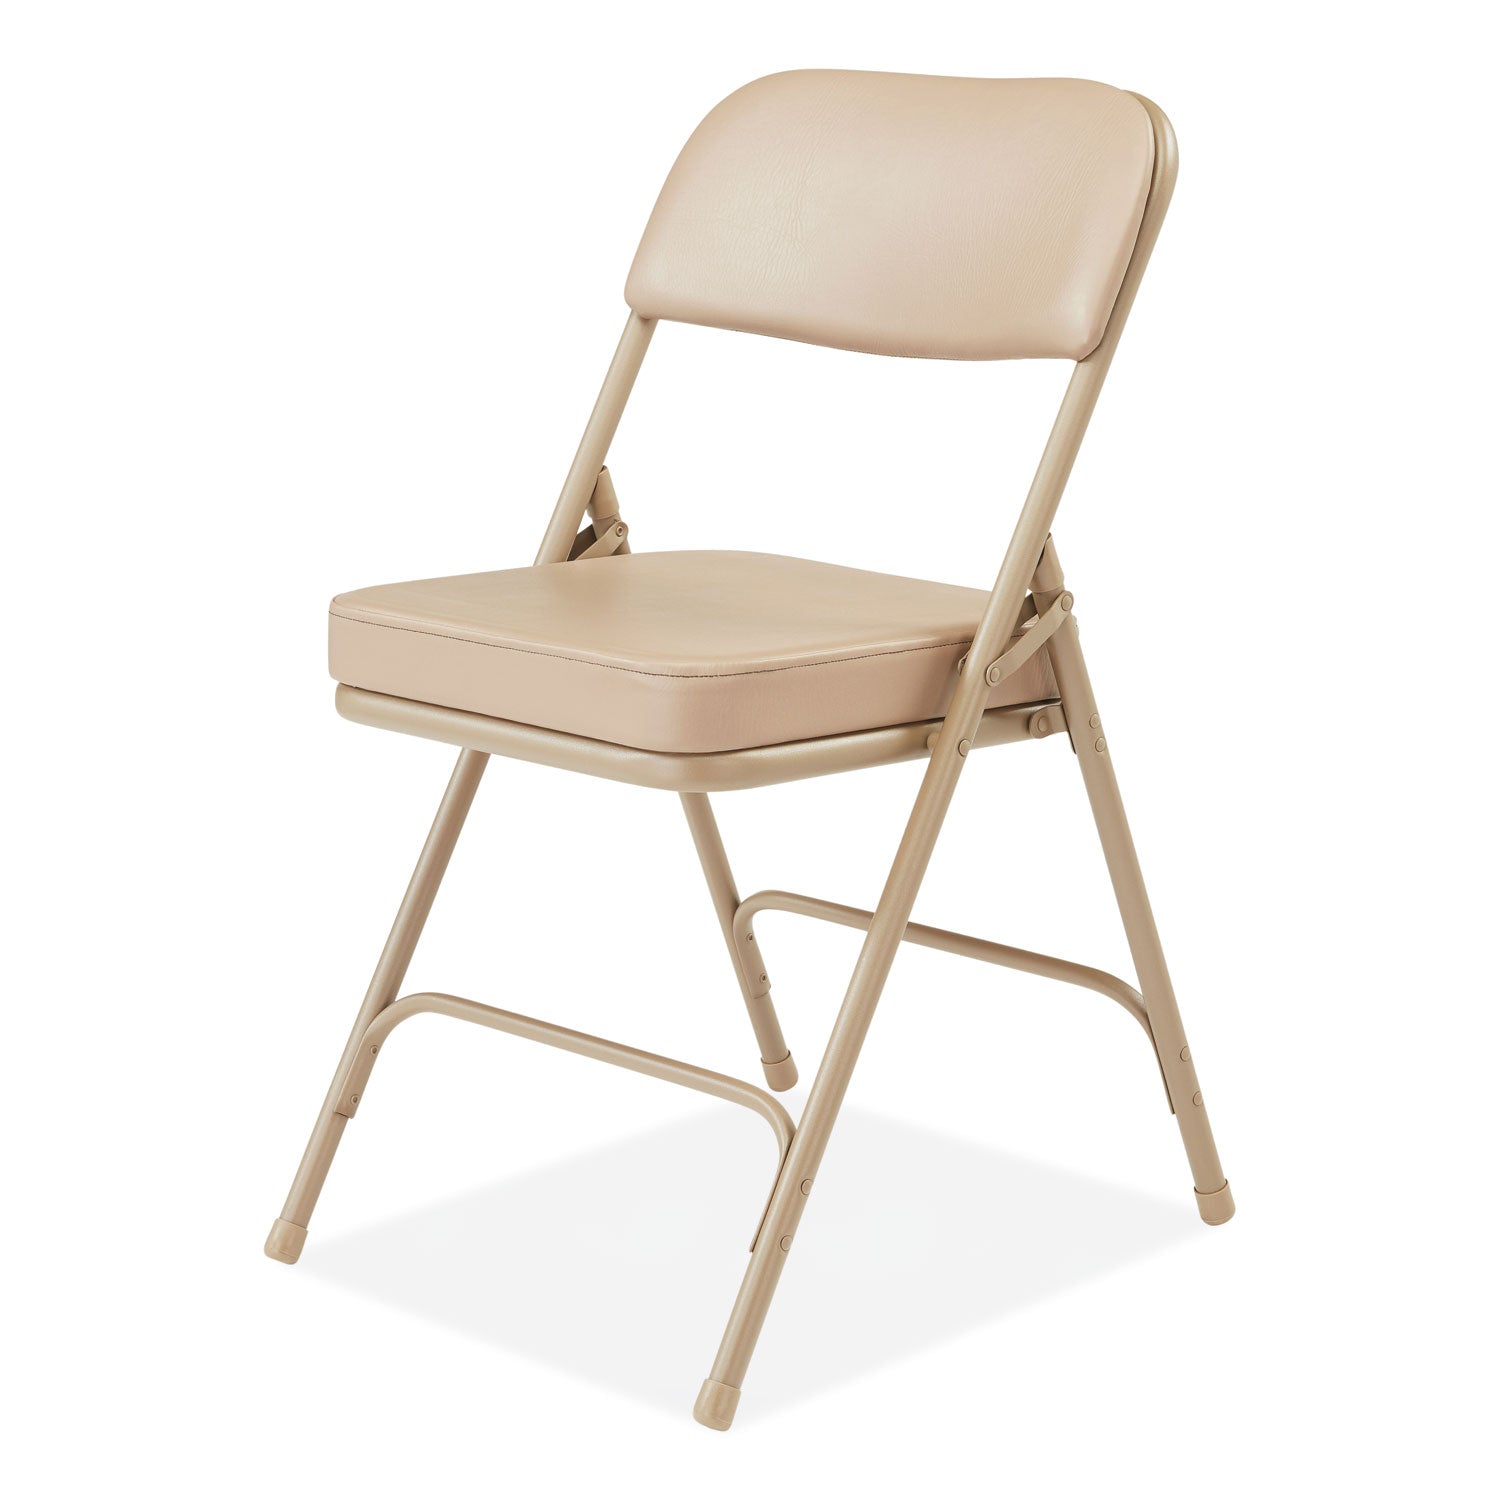 3200-series-2-vinyl-upholstered-double-hinge-folding-chair-supports-300lb-185-seat-ht-beige-2-ctships-in-1-3-bus-days_nps3201 - 3